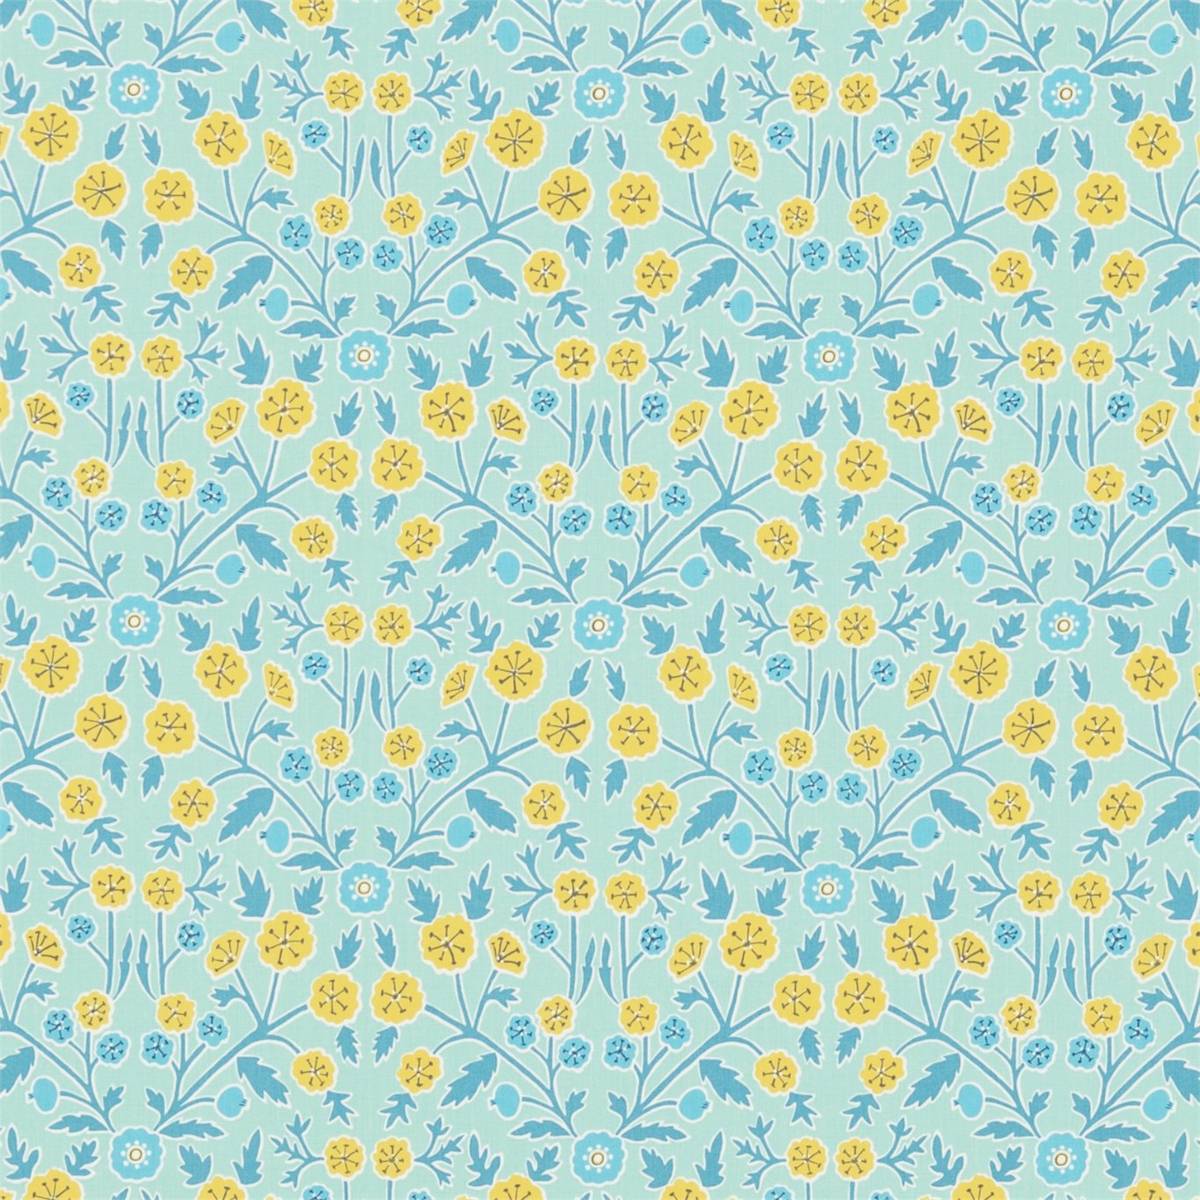 Candytuft Teal/Cadmium Fabric by Sanderson